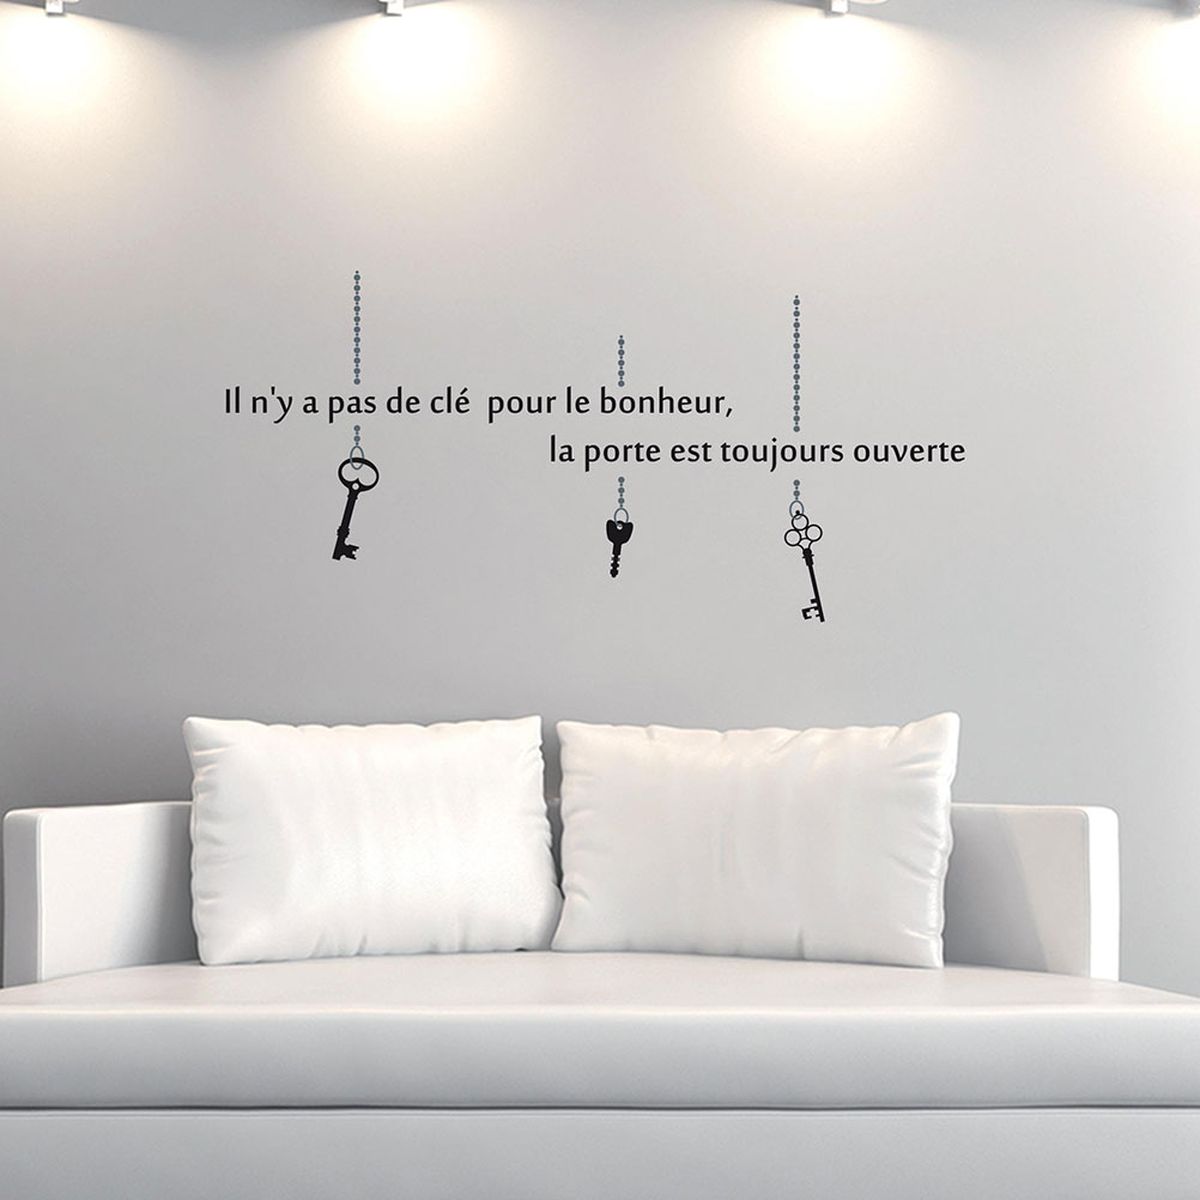 Quote Wall stickers 35 x 73.5 cm - Key for Happiness